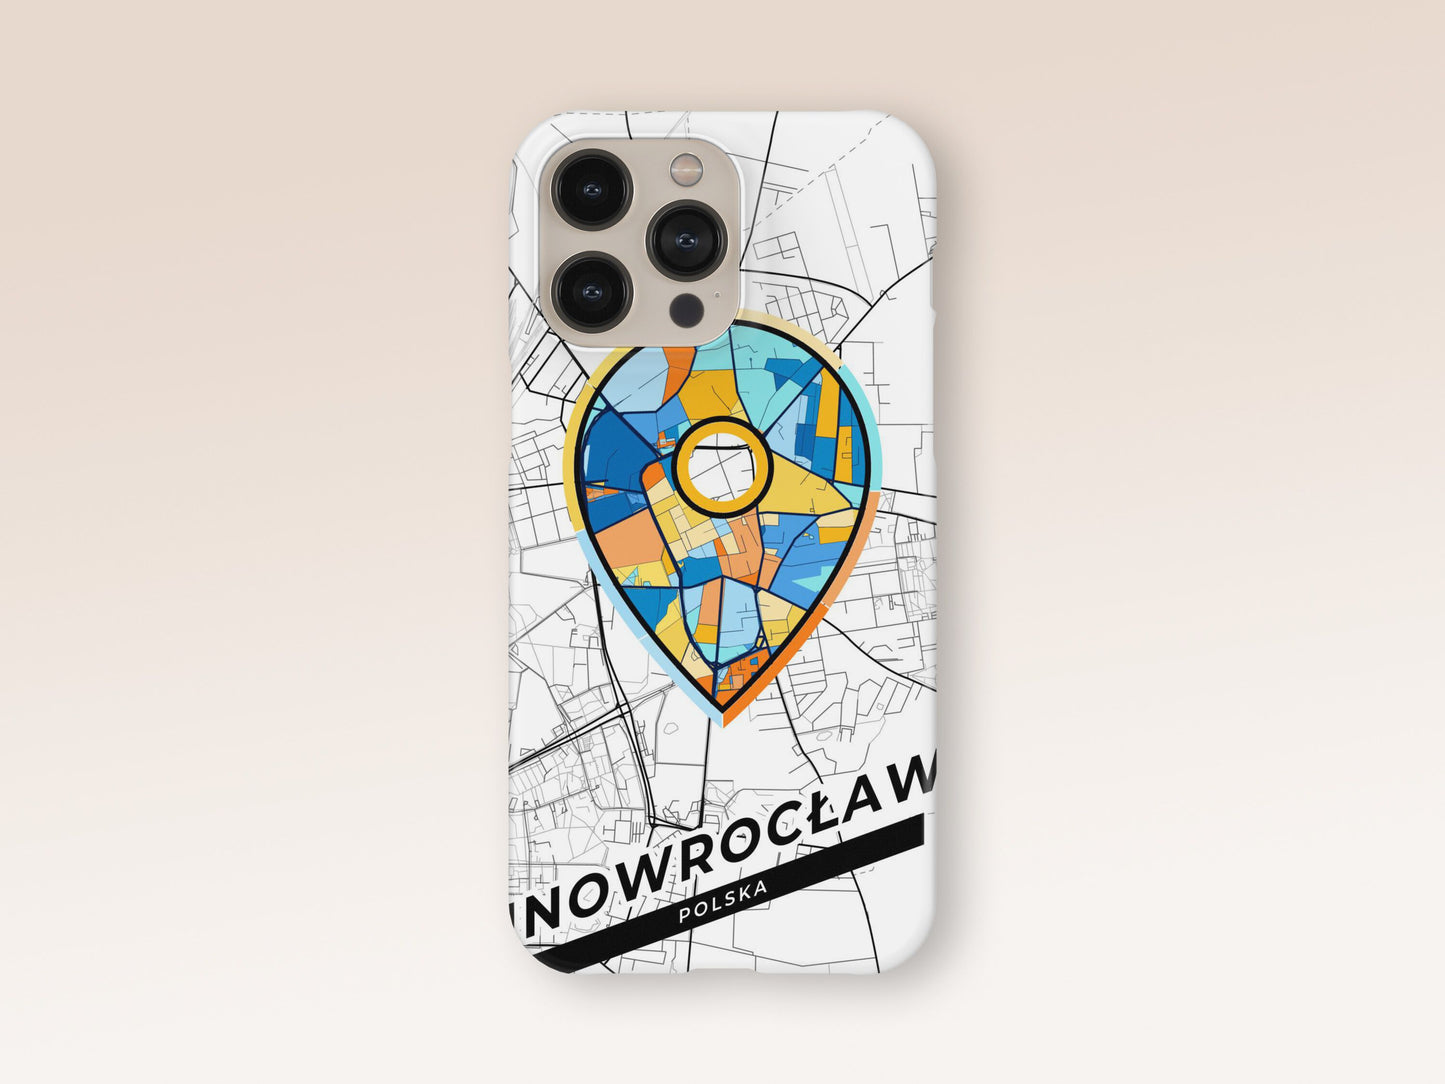 Inowrocław Poland slim phone case with colorful icon. Birthday, wedding or housewarming gift. Couple match cases. 1